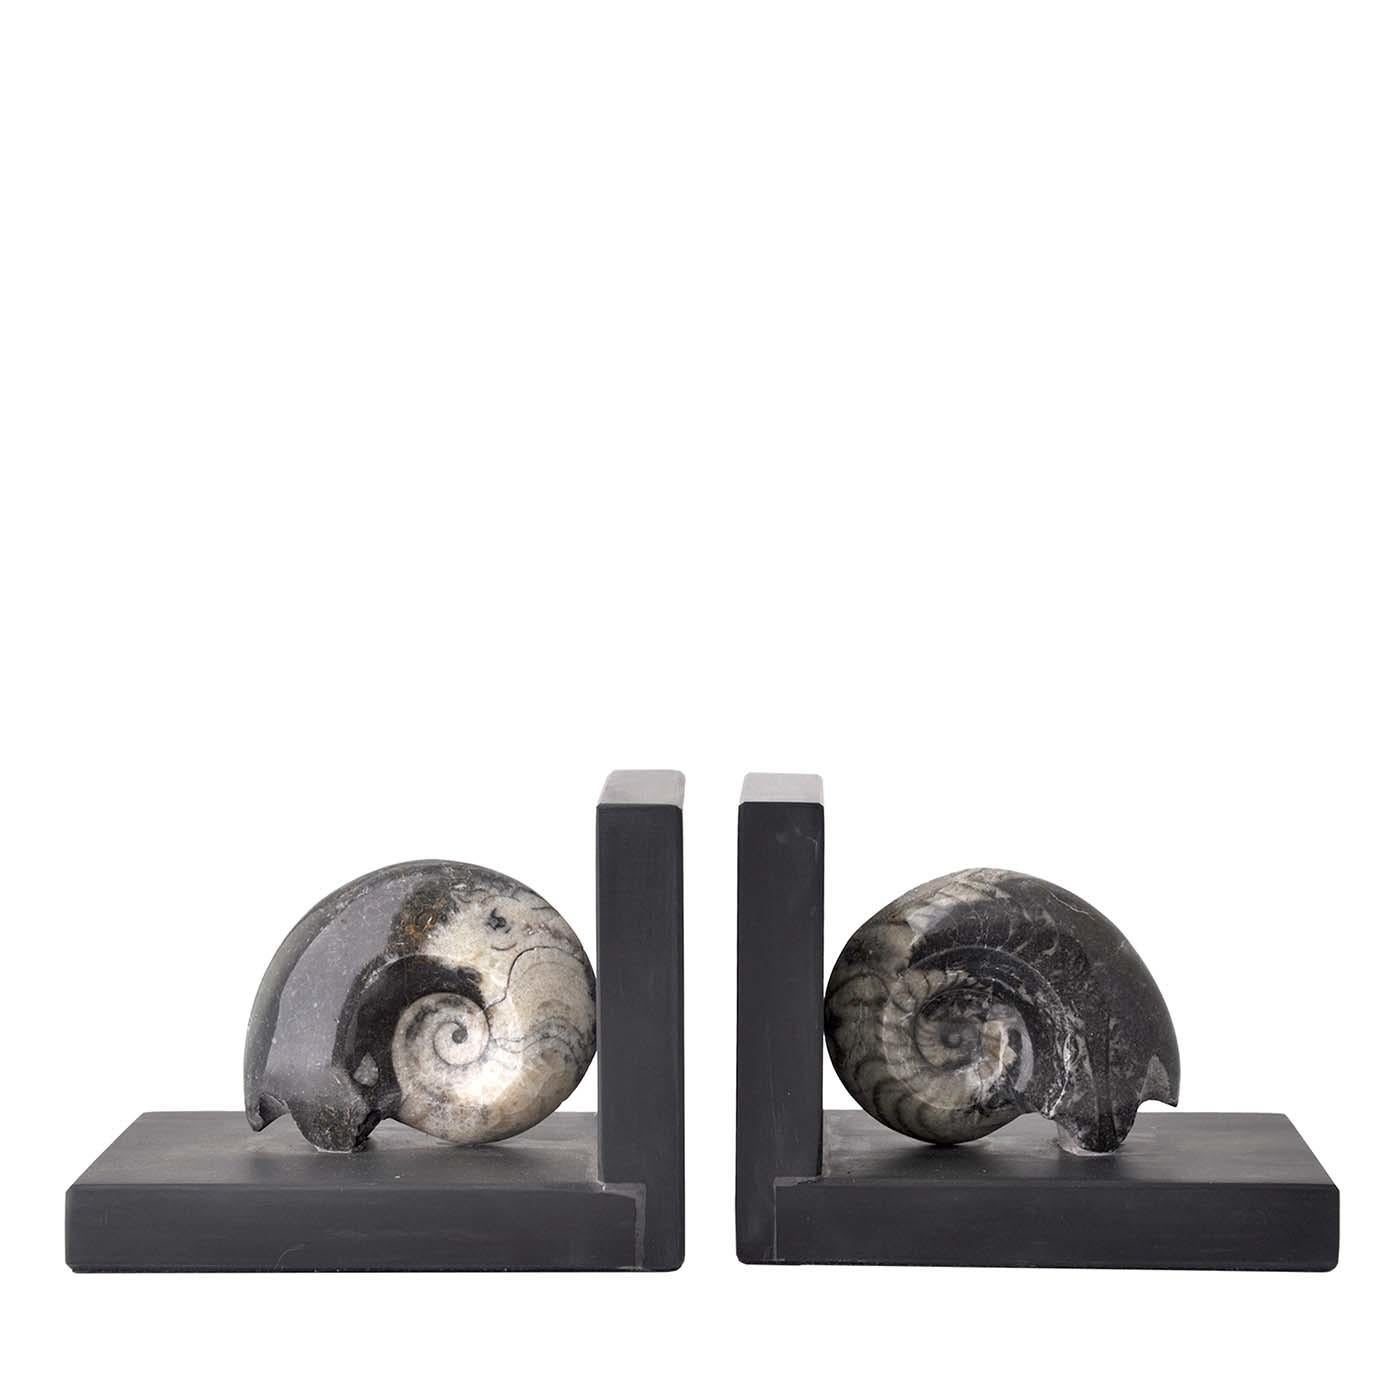 Mounted on chic slabs of slate in an L shape, these bookends feature authentic manticoceras fossil shells, guaranteeing that no two are exactly alike - ever - thanks to the pieces' organic patterns and tones. Monochromatic, linear and elegant, the